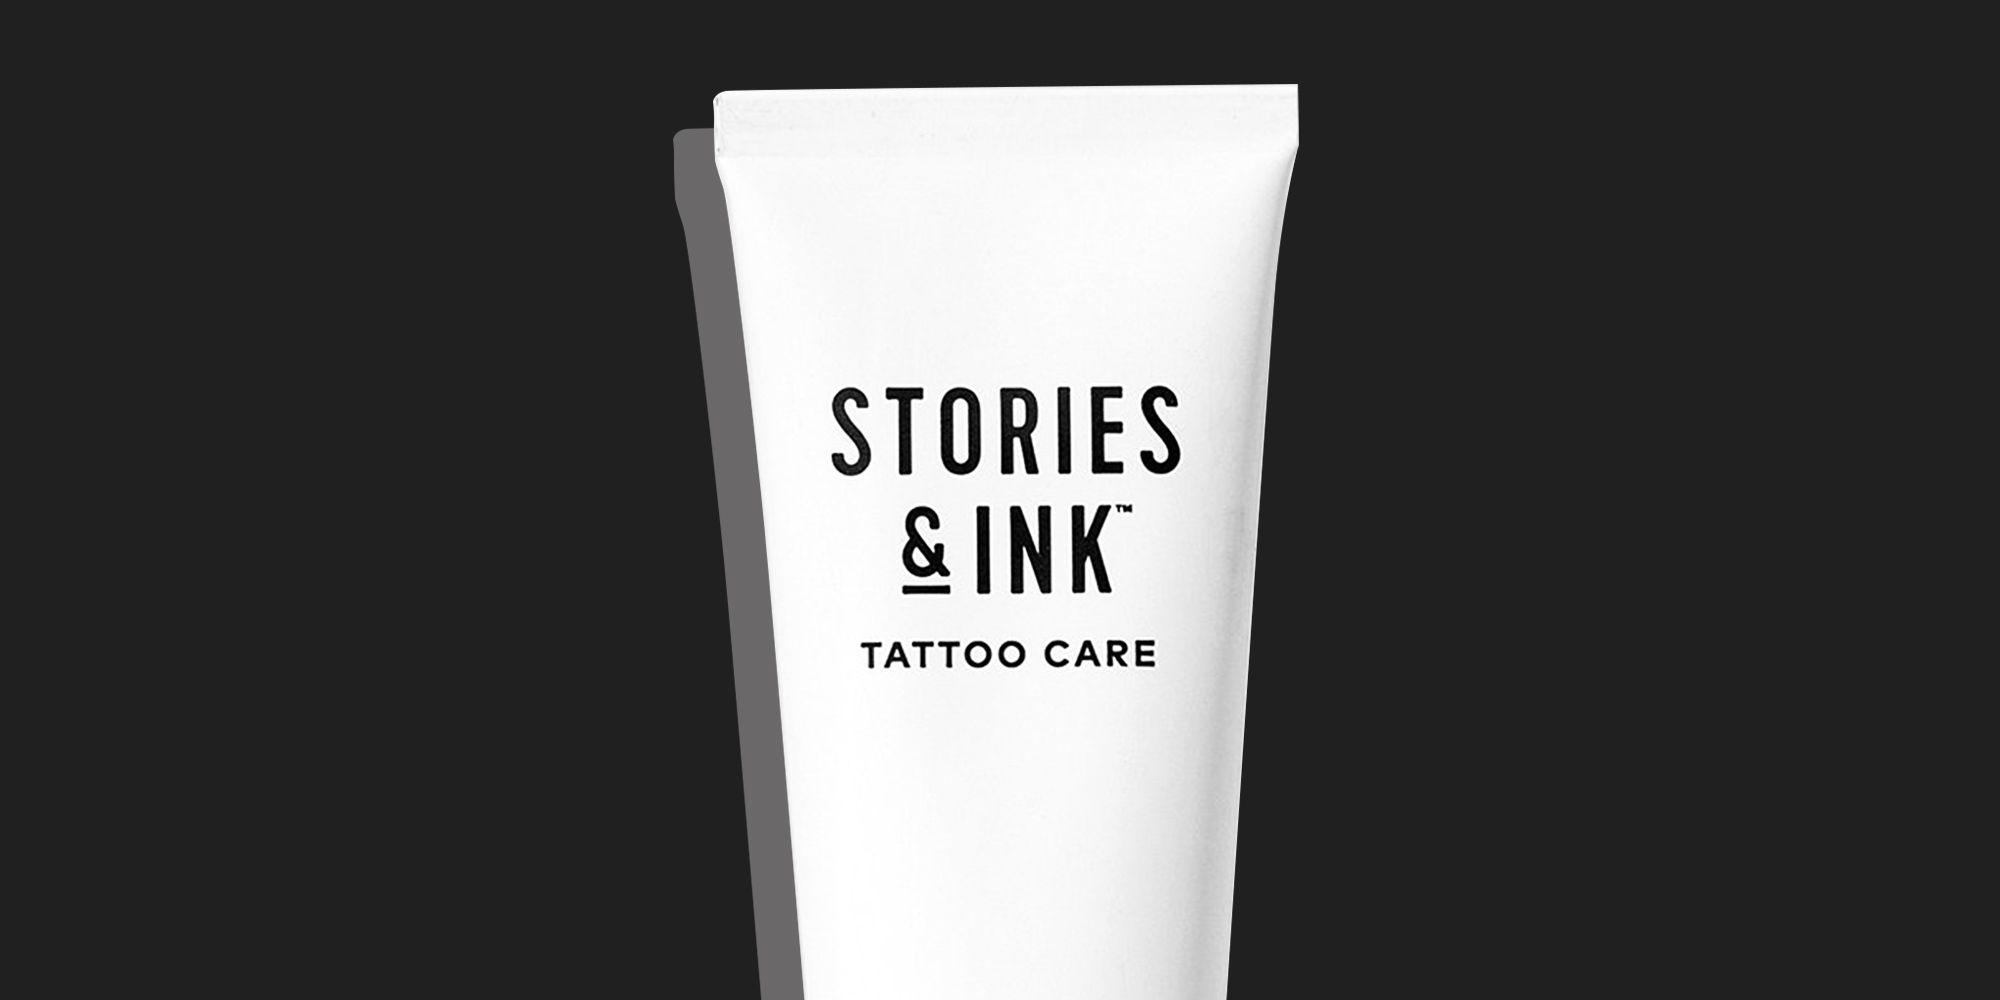 10 Best Tattoo Lotions for Men 2022